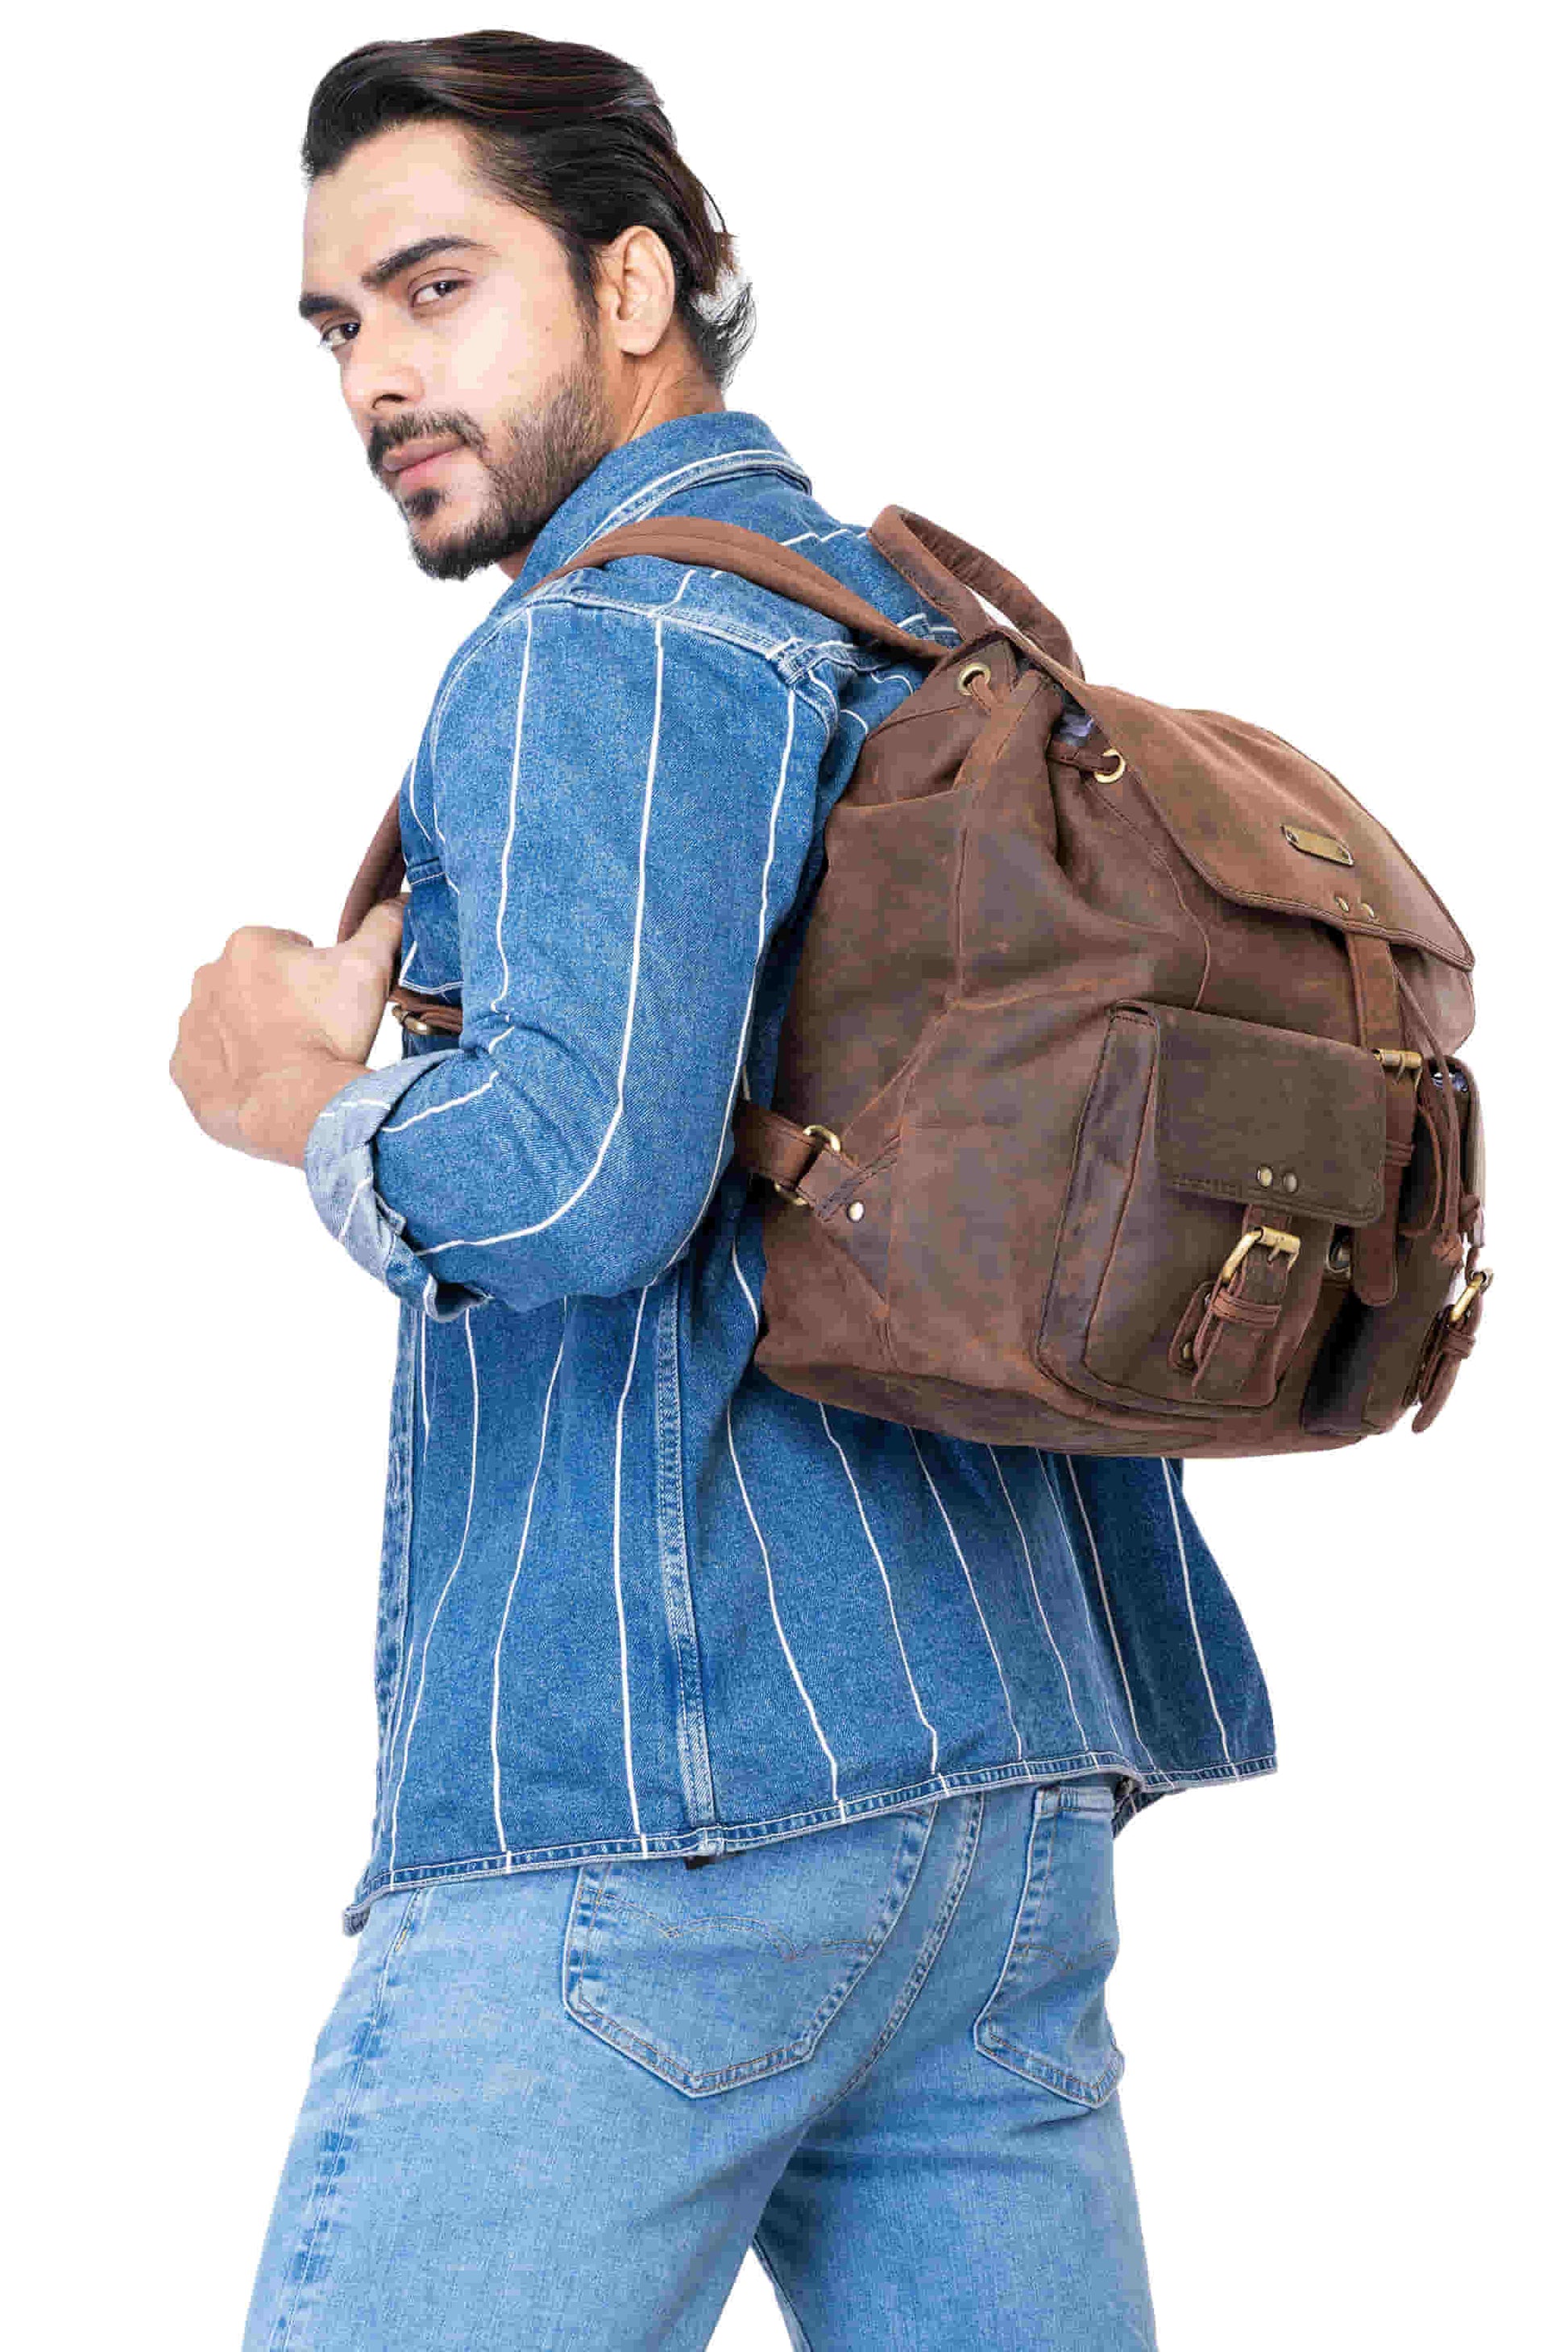 Style n Craft 392650 Backpack in Full Grain Dark Brown Hunter Leather - in use - carrying the backpack on the back using the leather shoulder straps - side view